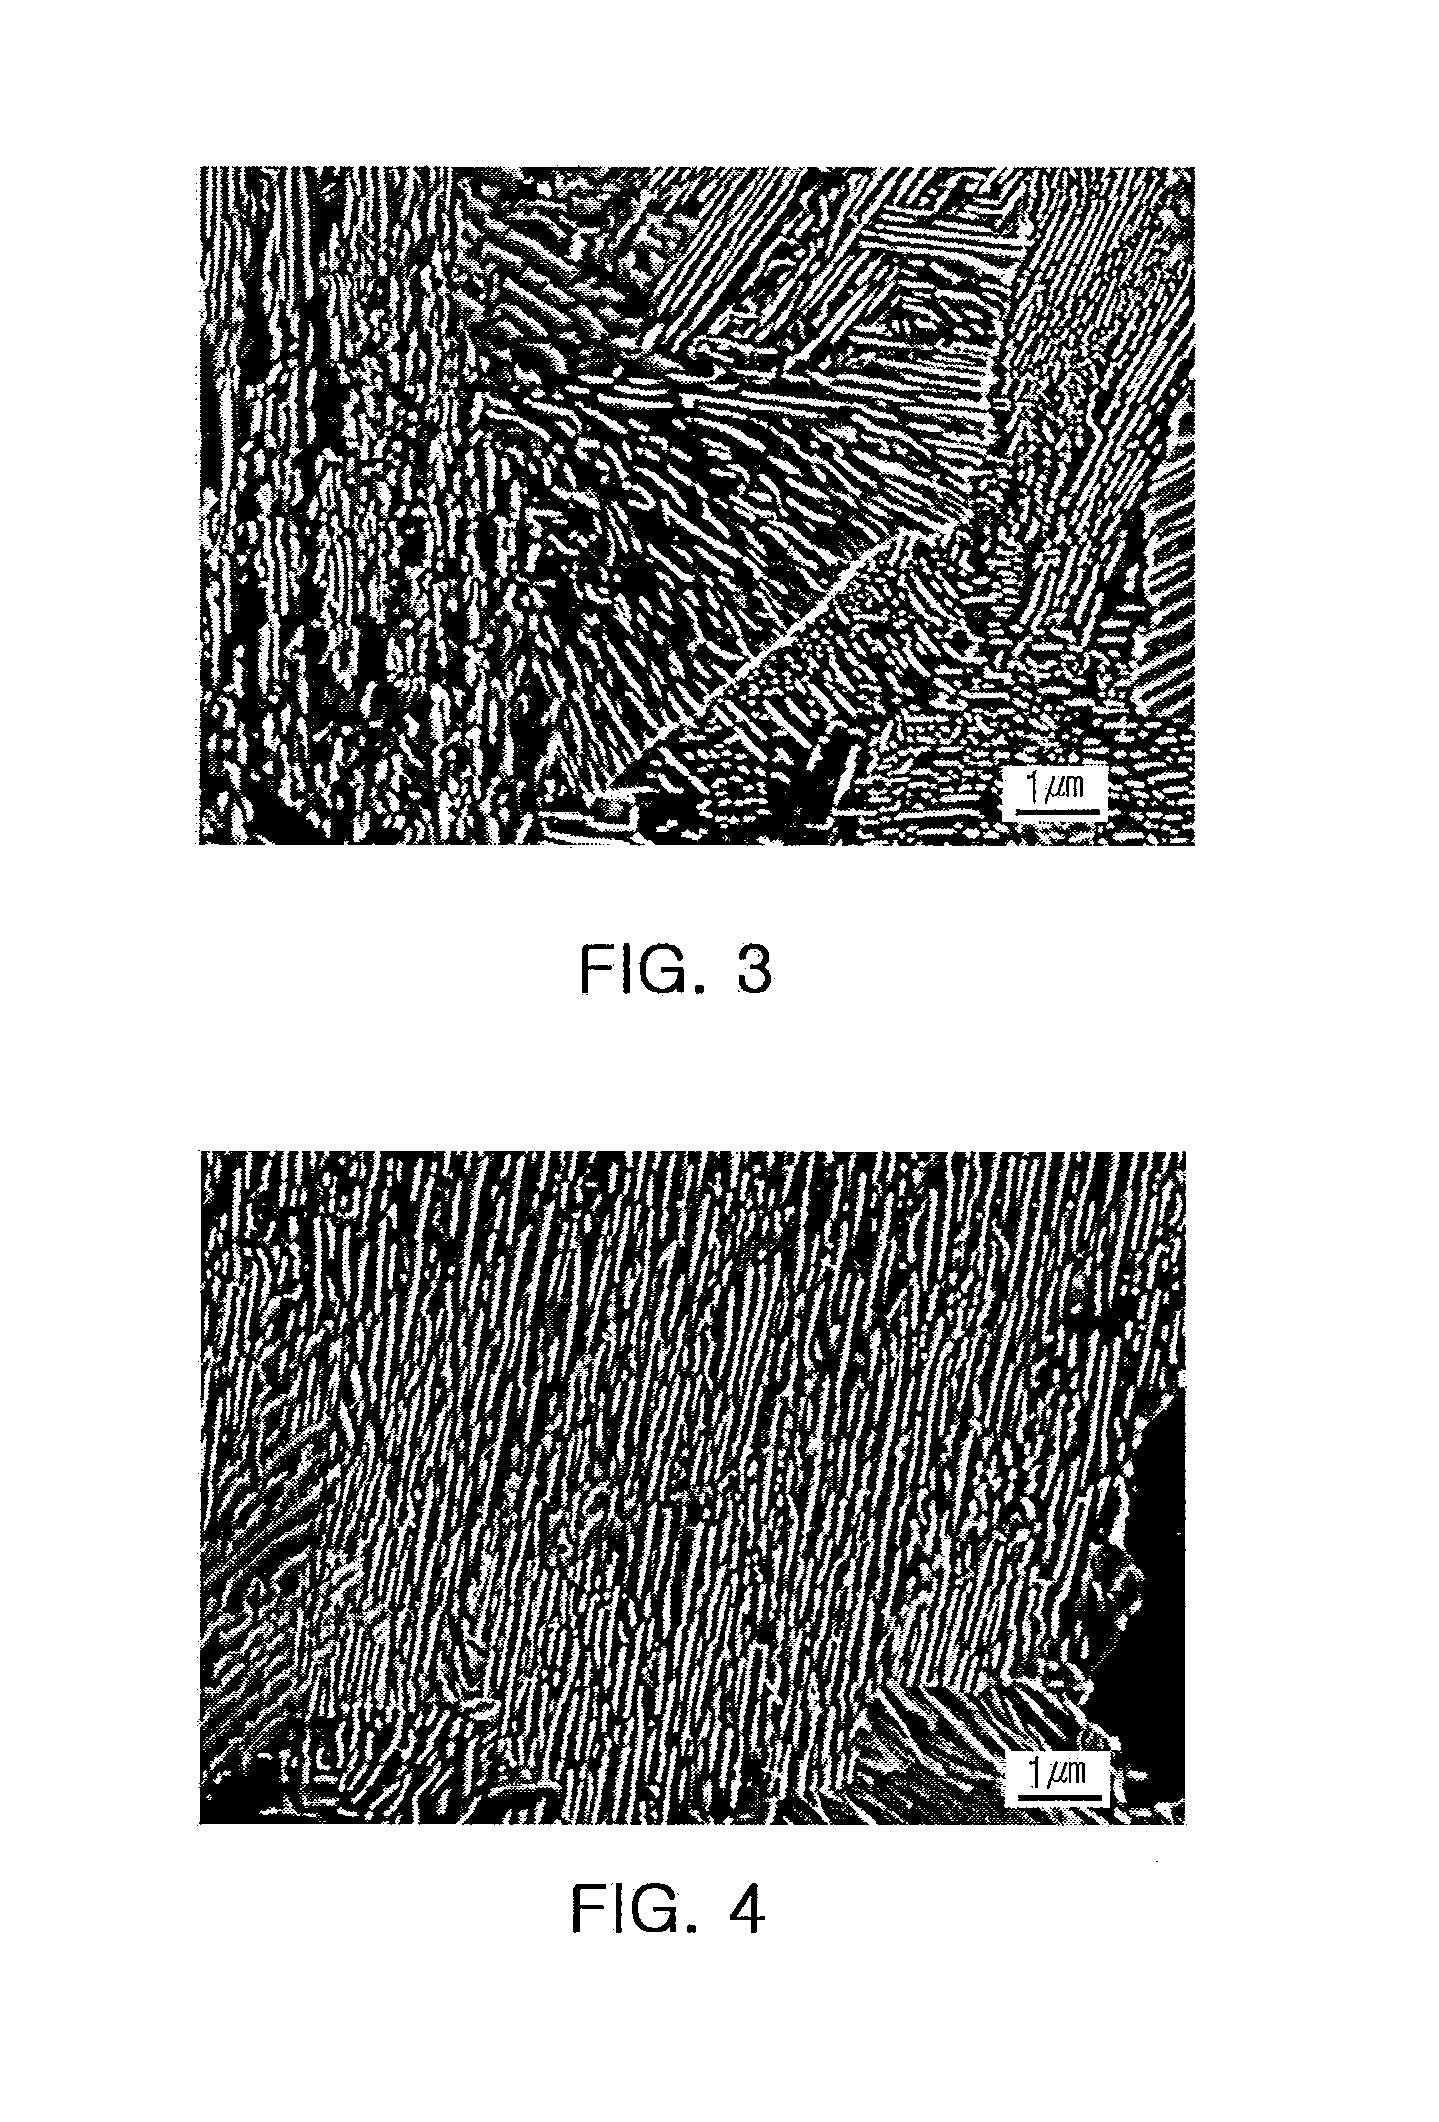 High-Toughness Cold-Drawn Non-Heat-Treated Wire Rod, and Method for Manufacturing Same